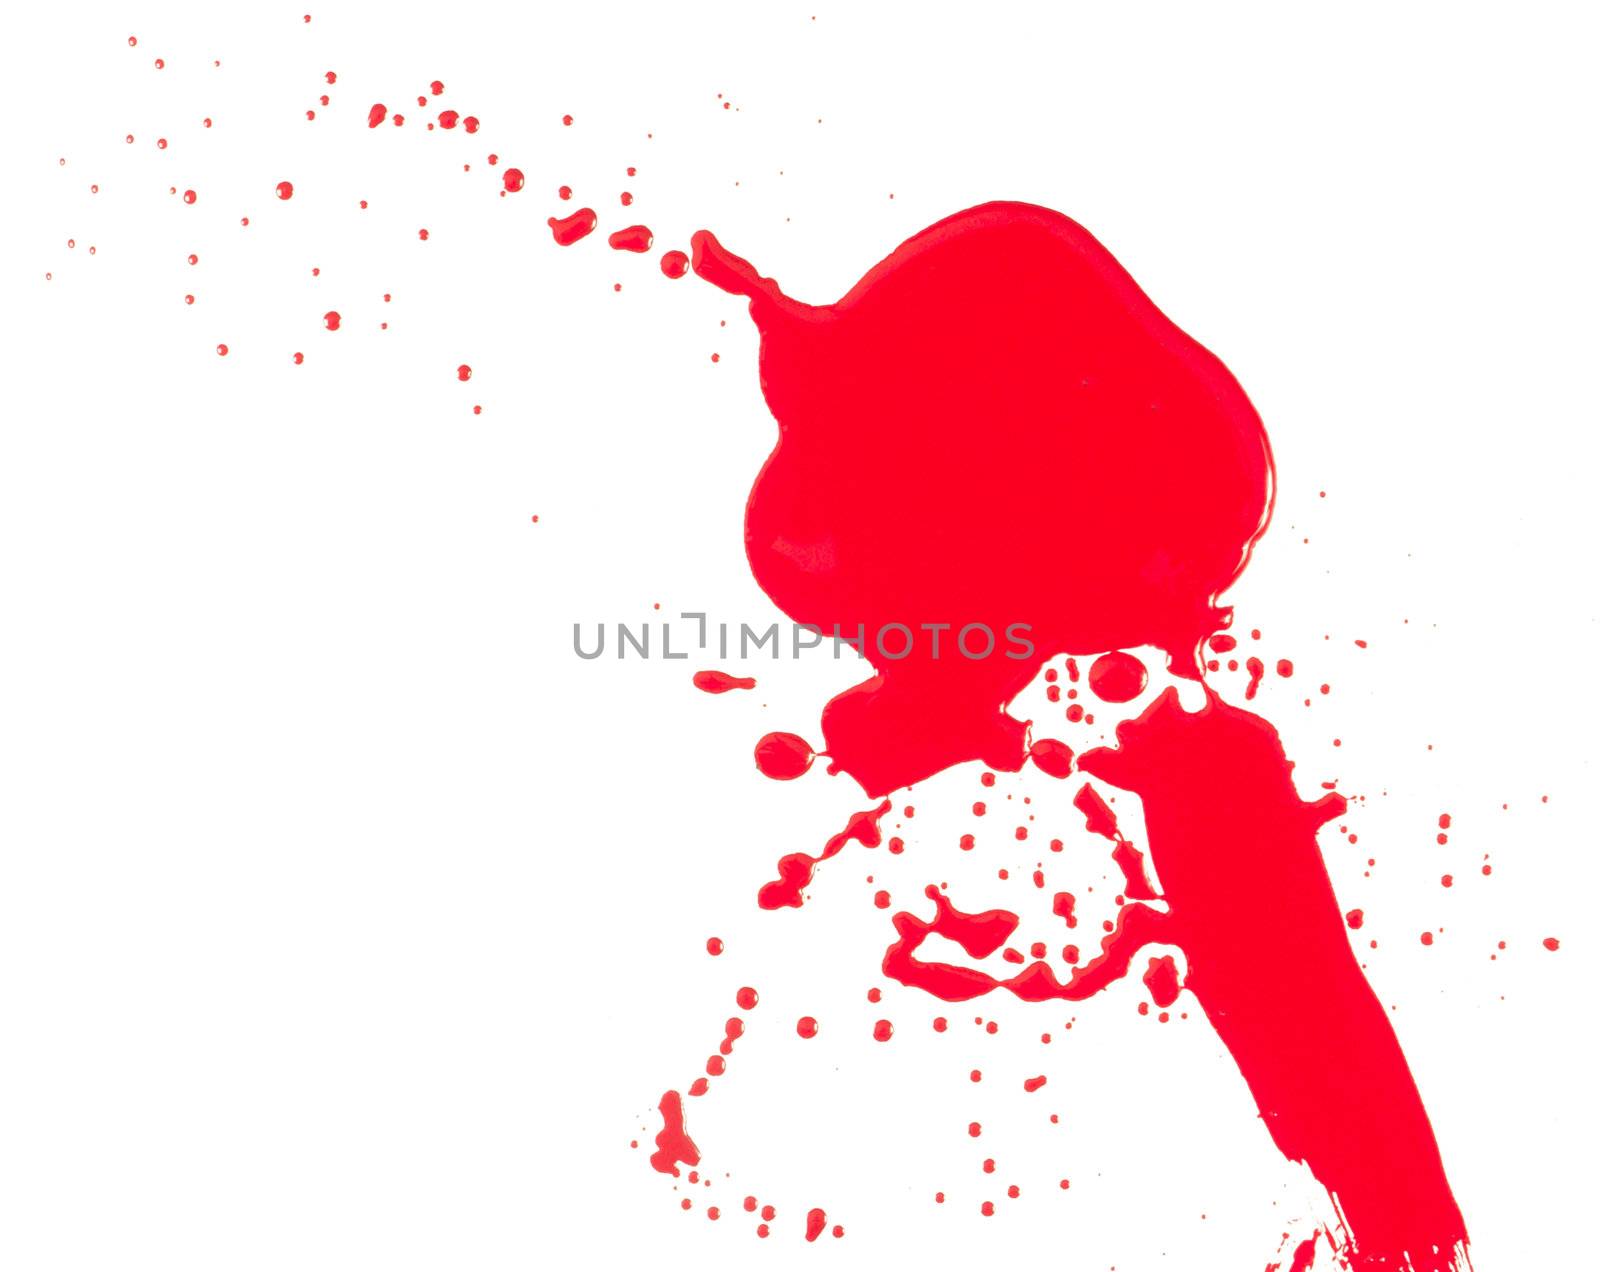 The abstract image red color  on a white background